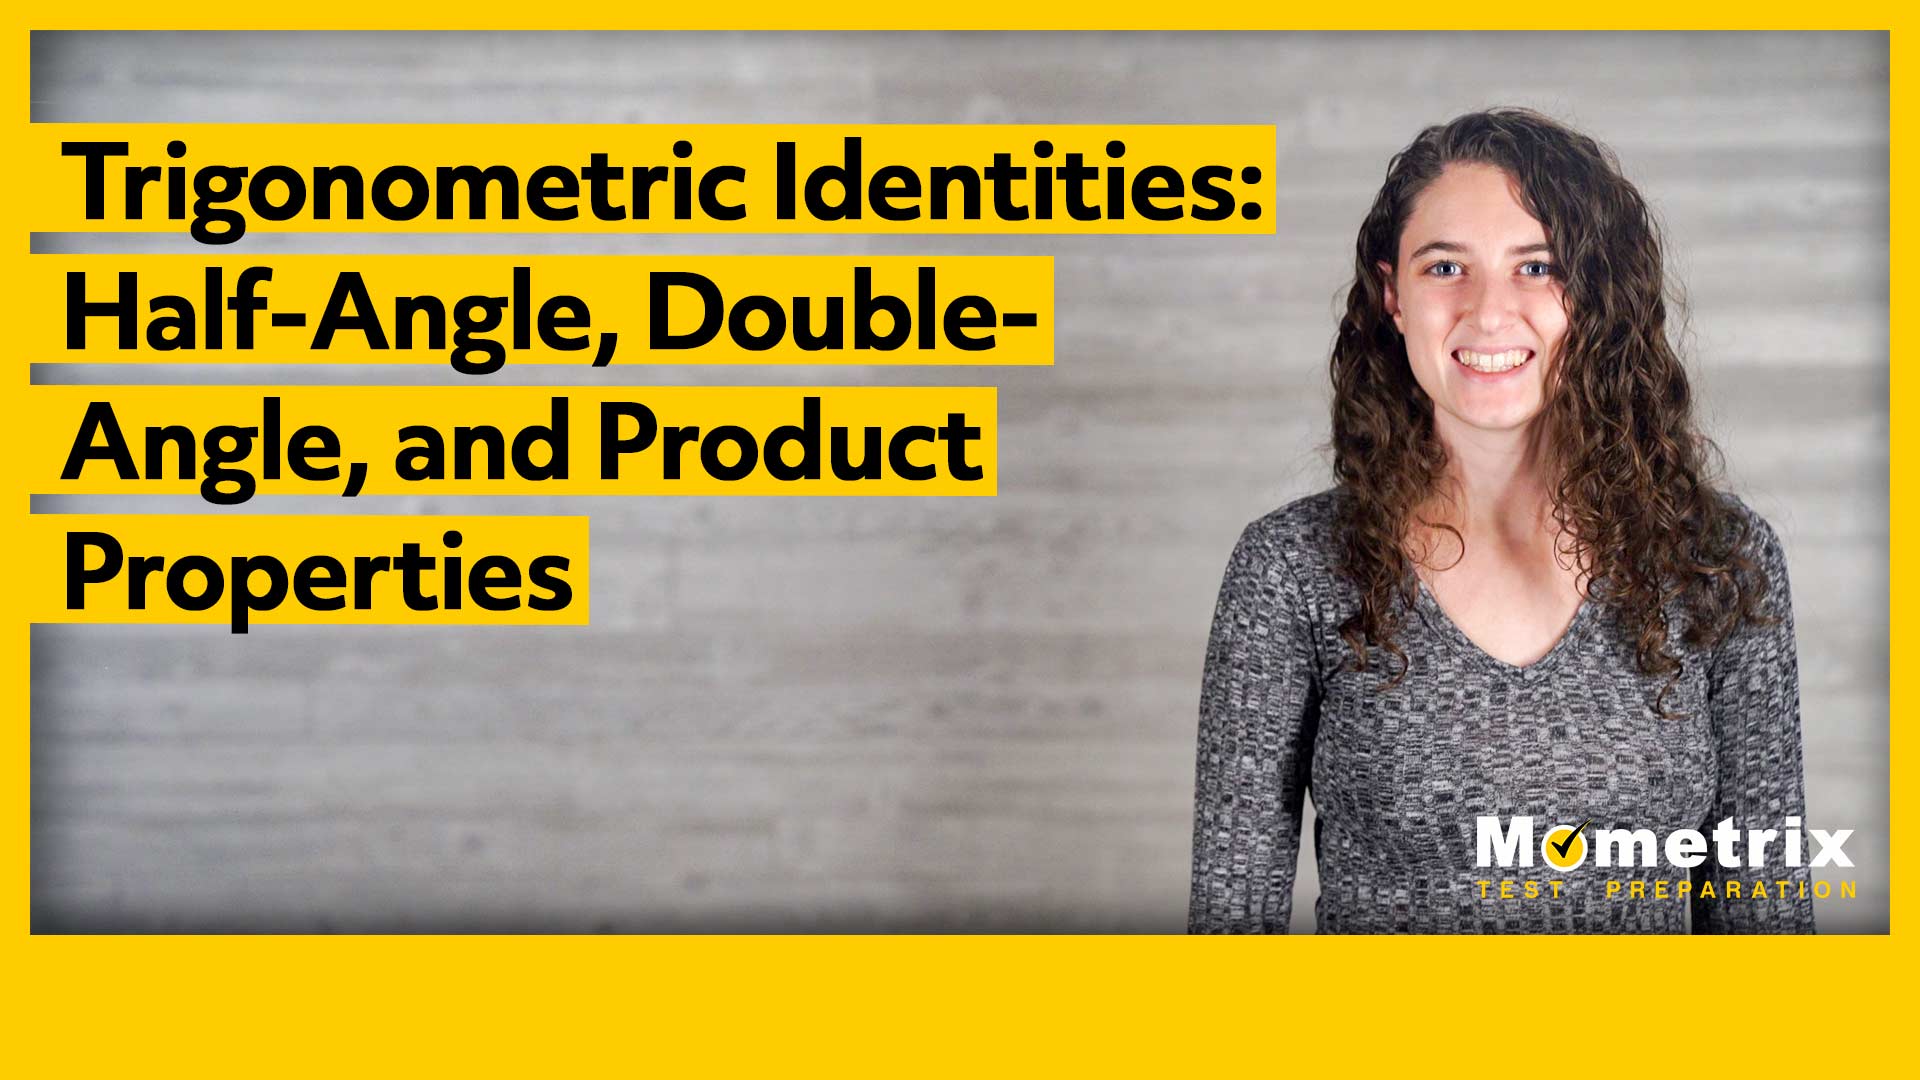 A woman stands smiling with text that reads "Trigonometric Identities: Half-Angle, Double-Angle, and Product Properties" and the Mometrix Test Preparation logo.